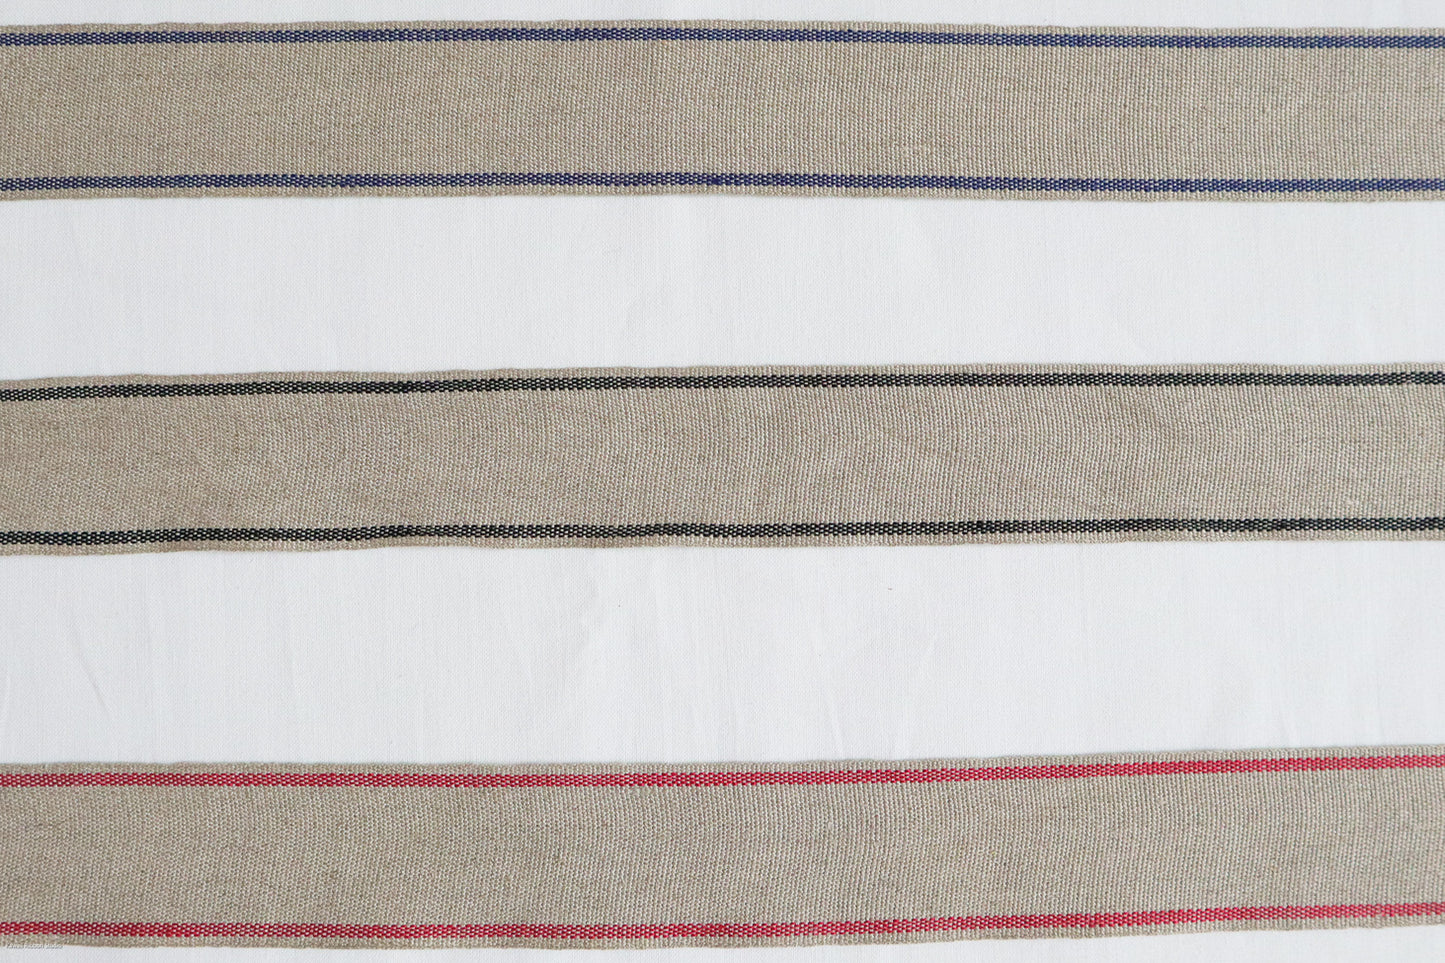 30mm & 38mm stripe ribbon/ tape for embroidery in 100% washed linen